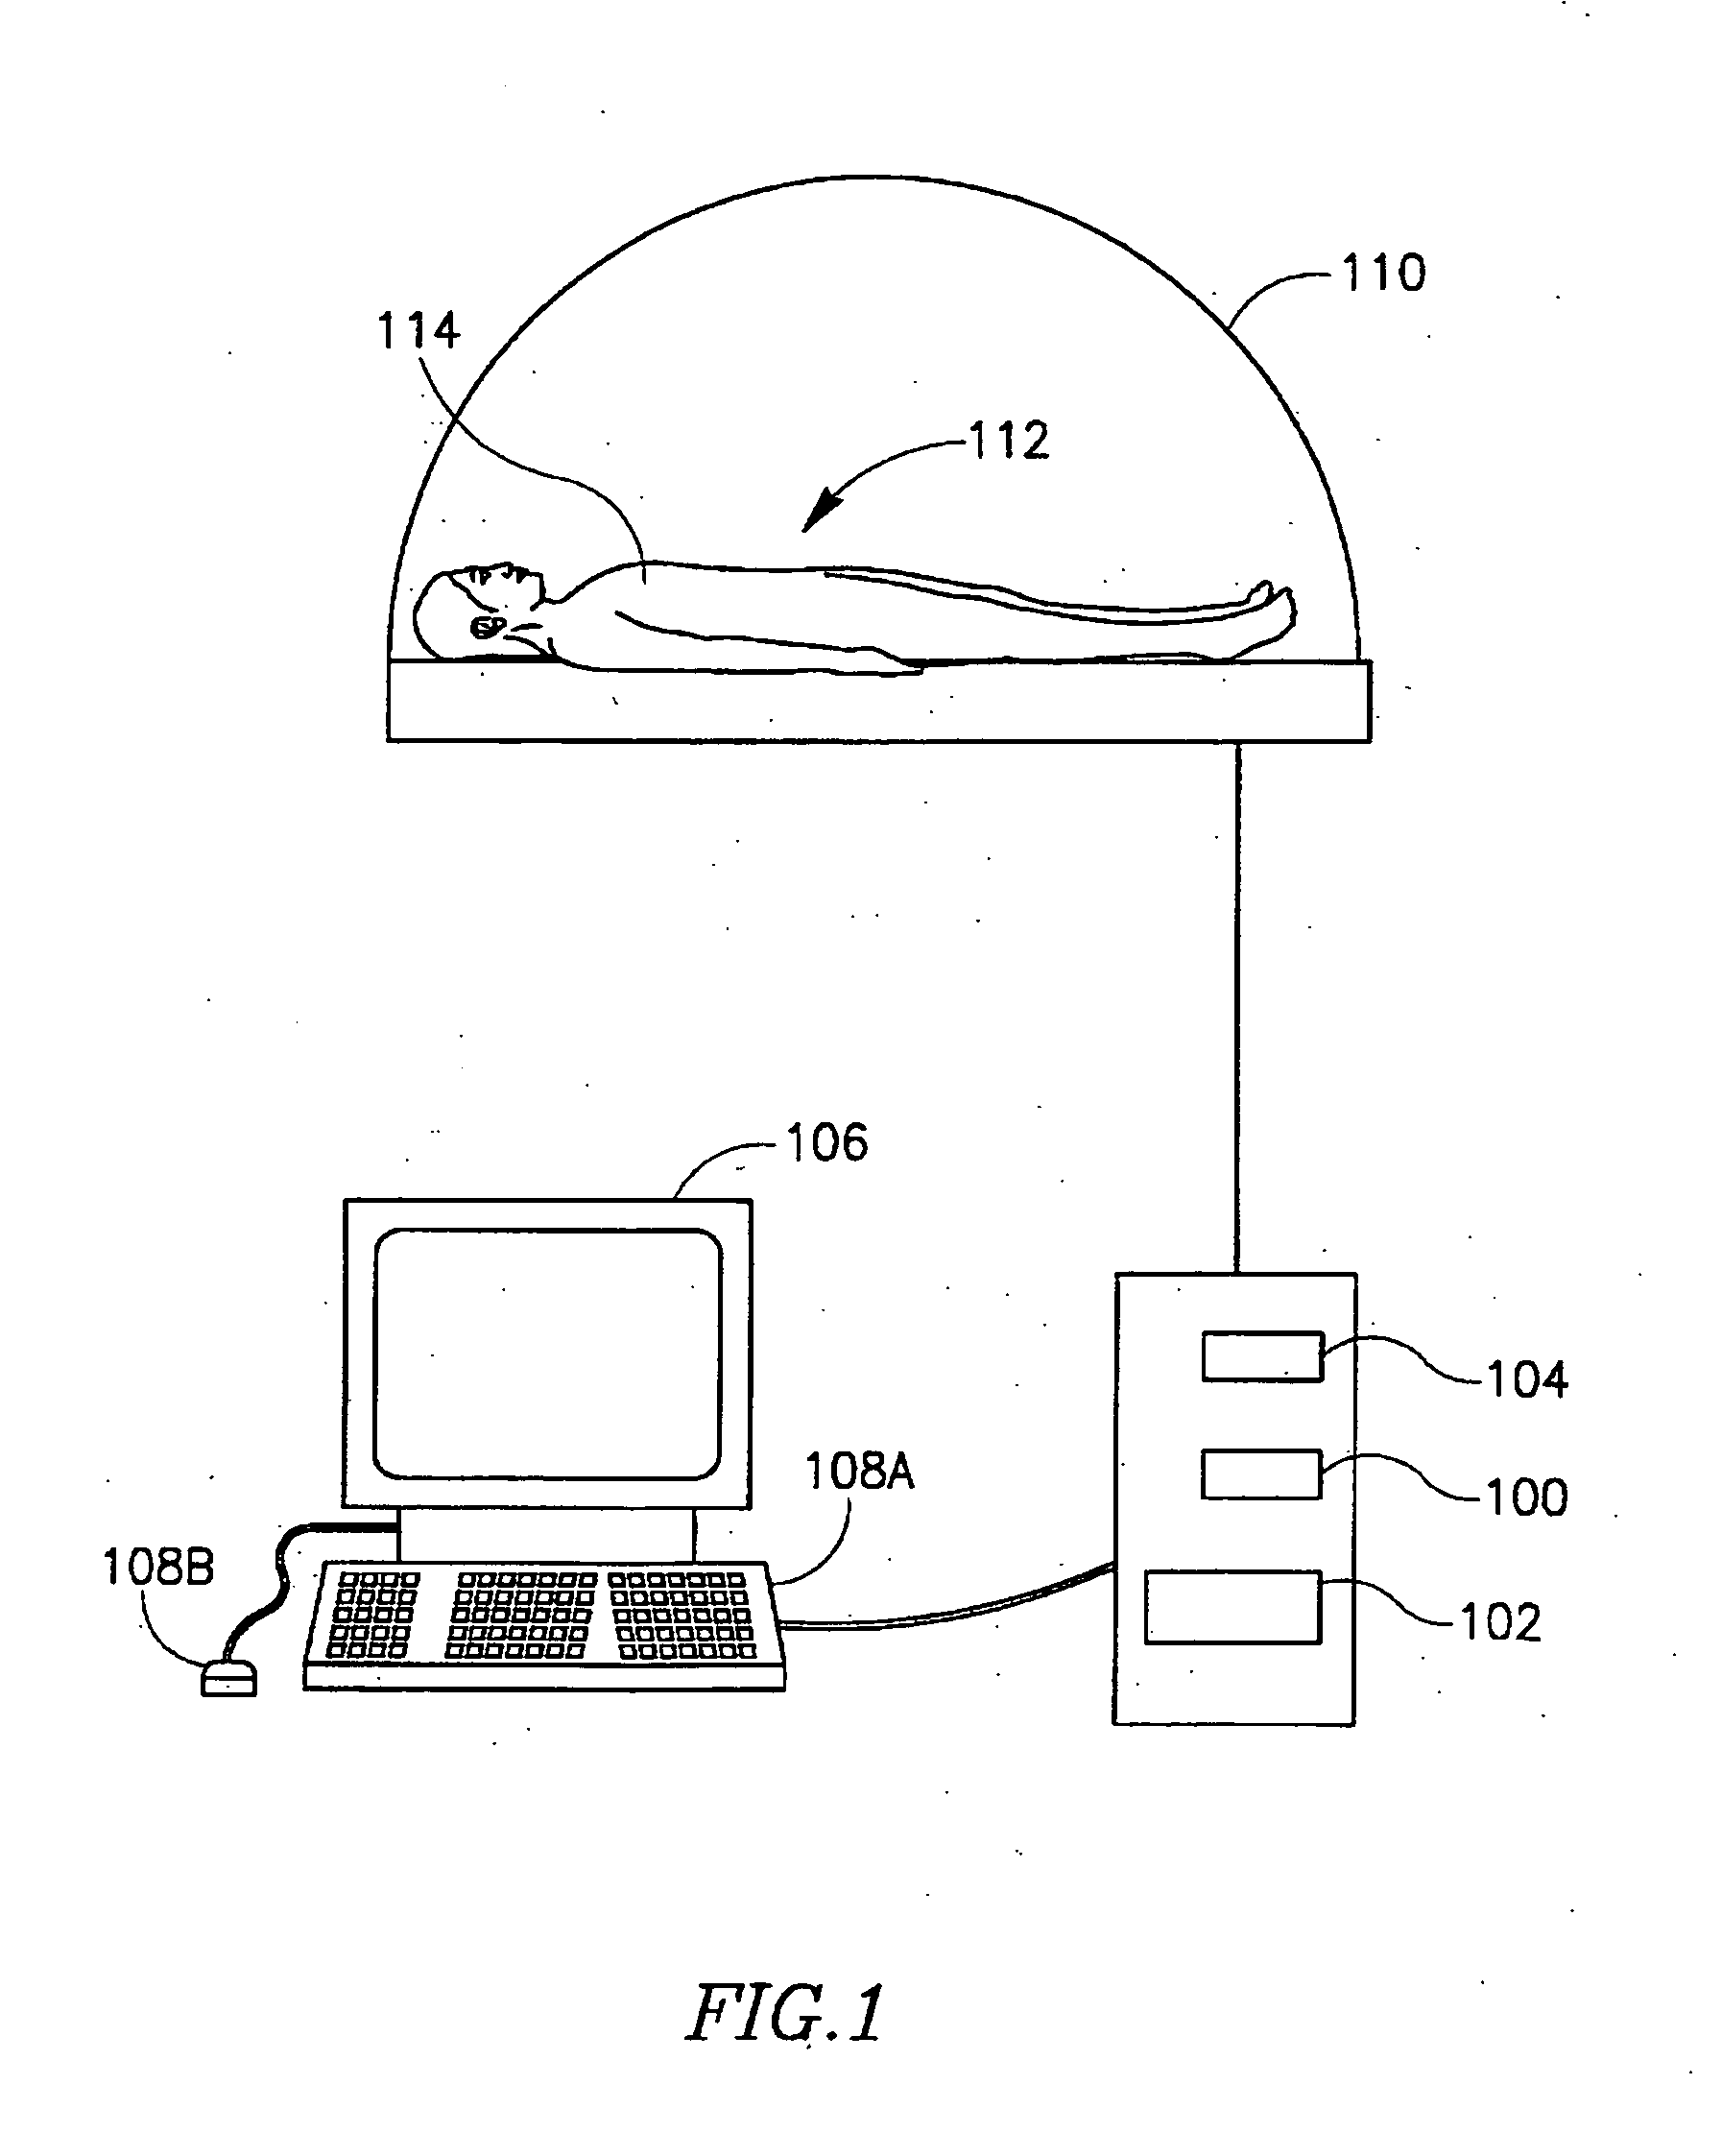 System and method for segmenting structures in a series of images